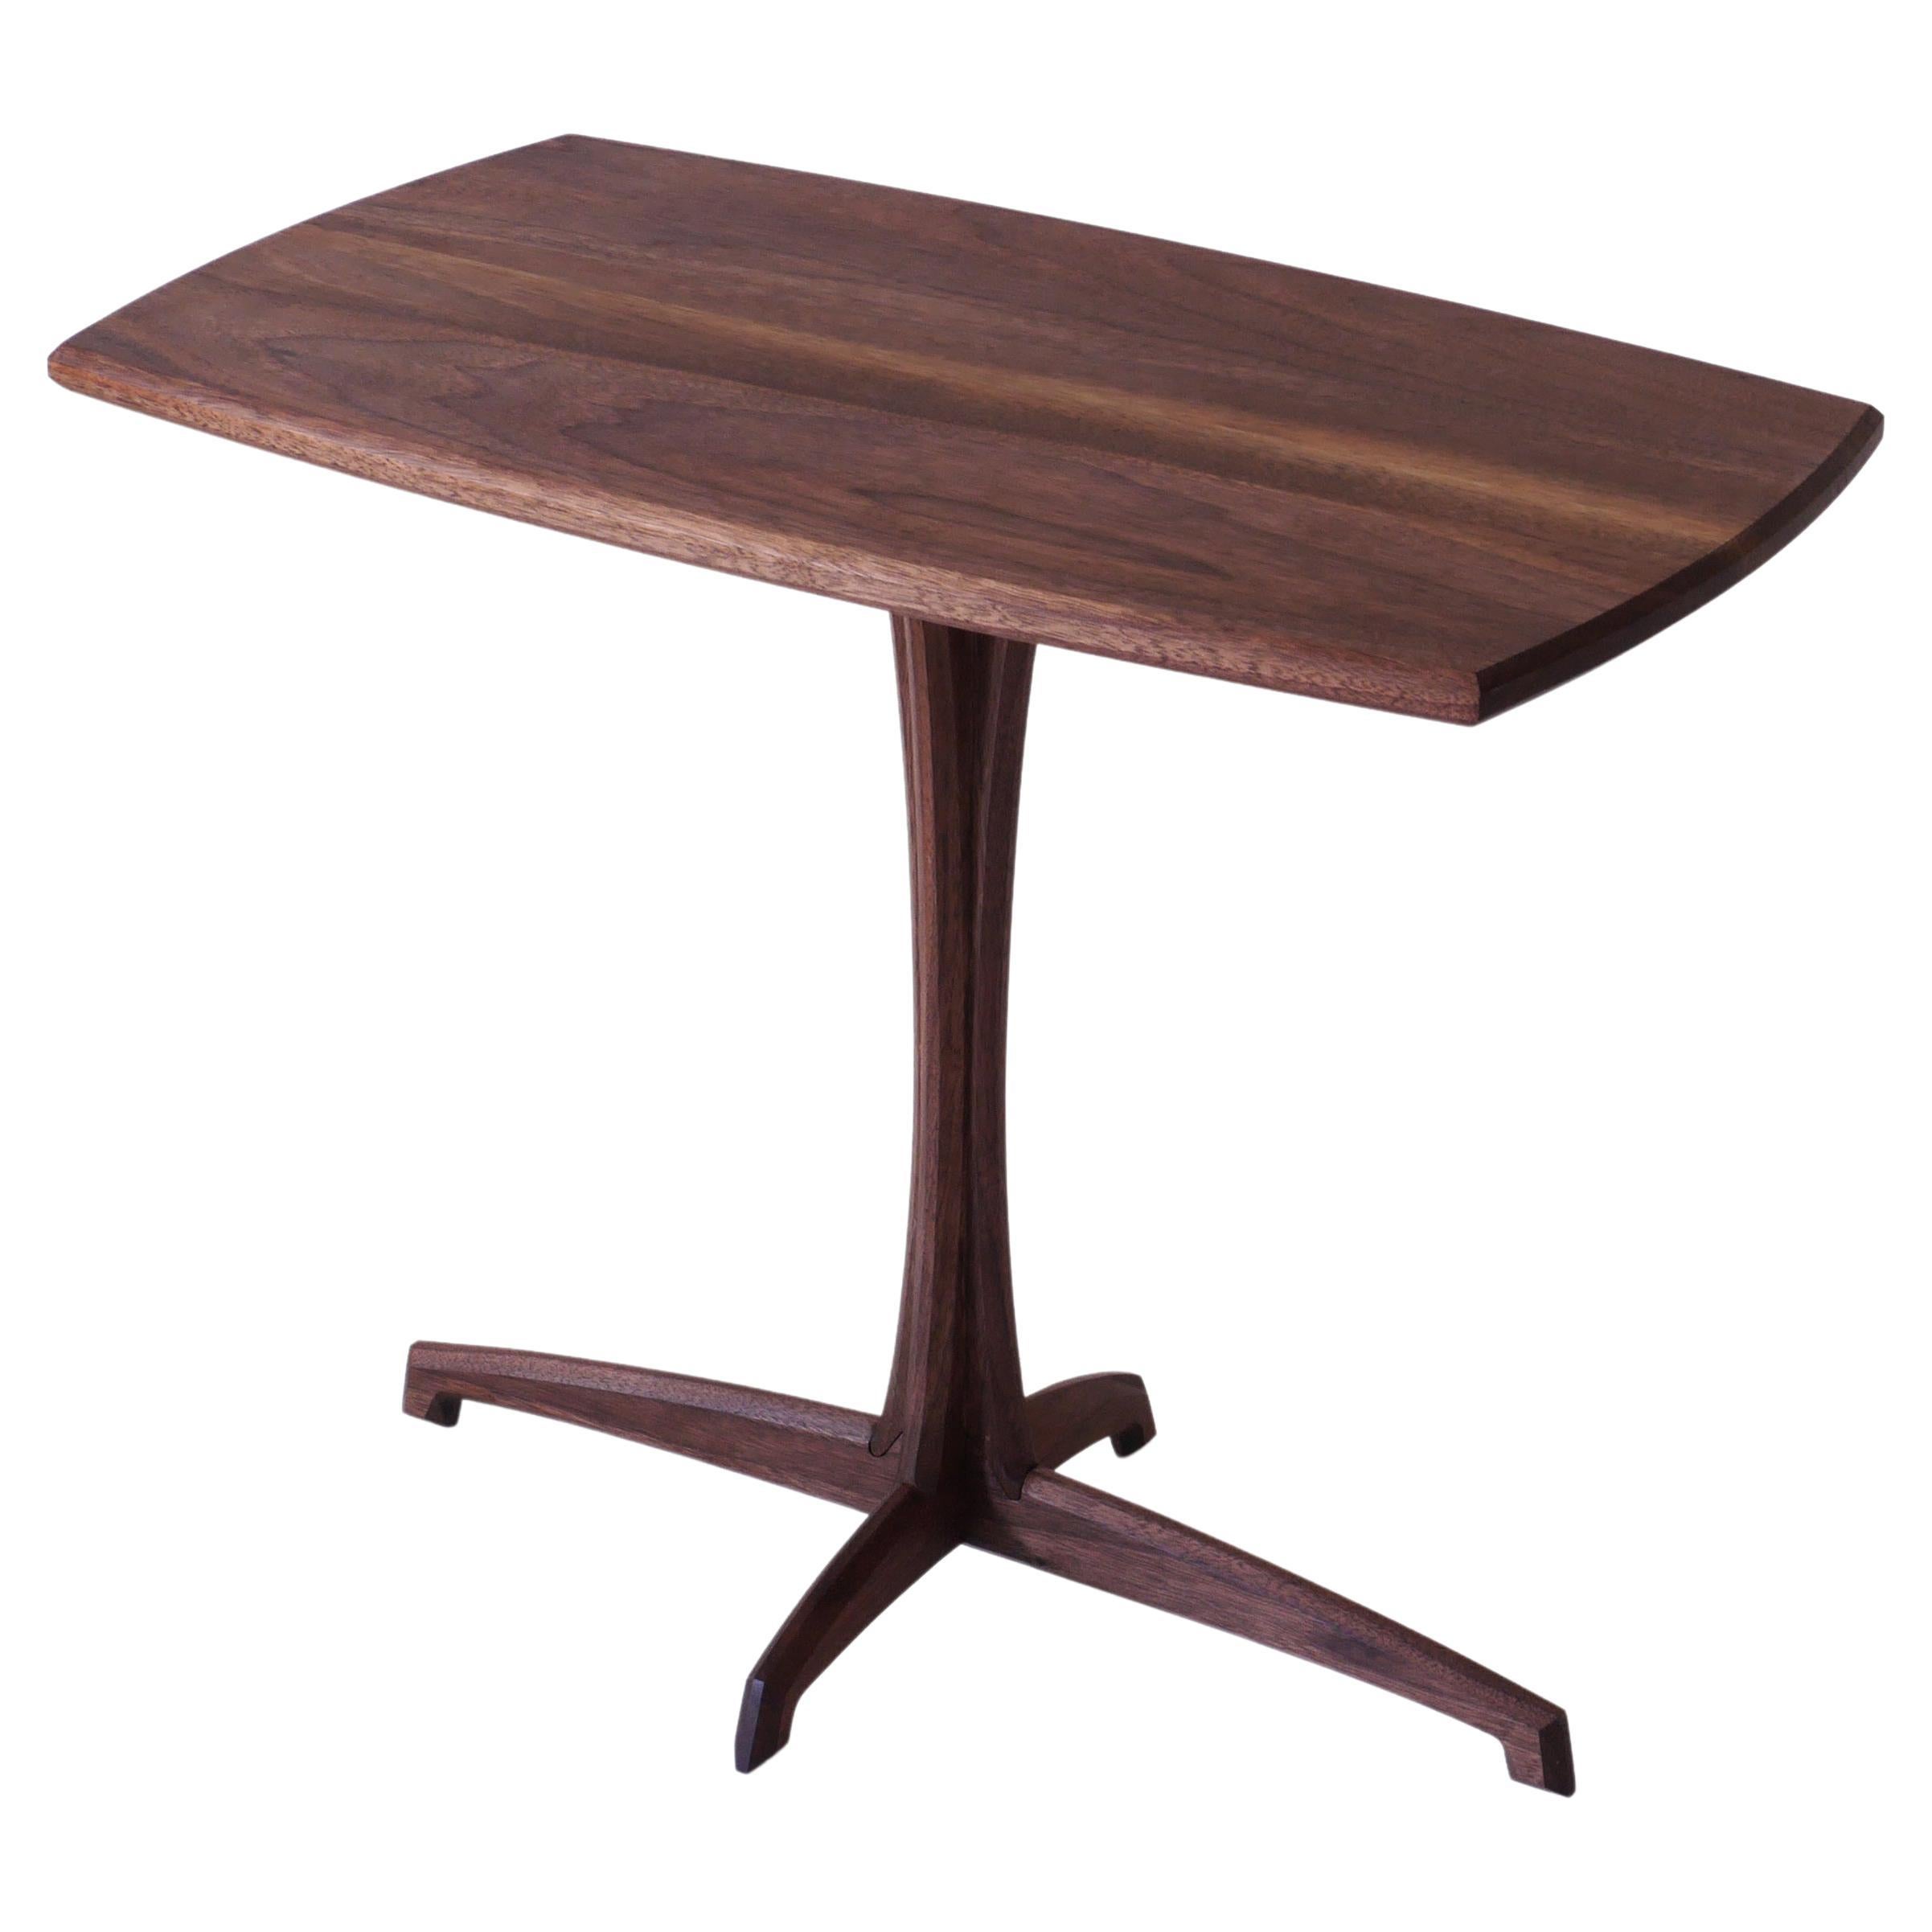 Walnut Plume Side Table, Contemporary Handmade Pedestal End Table by Arid For Sale